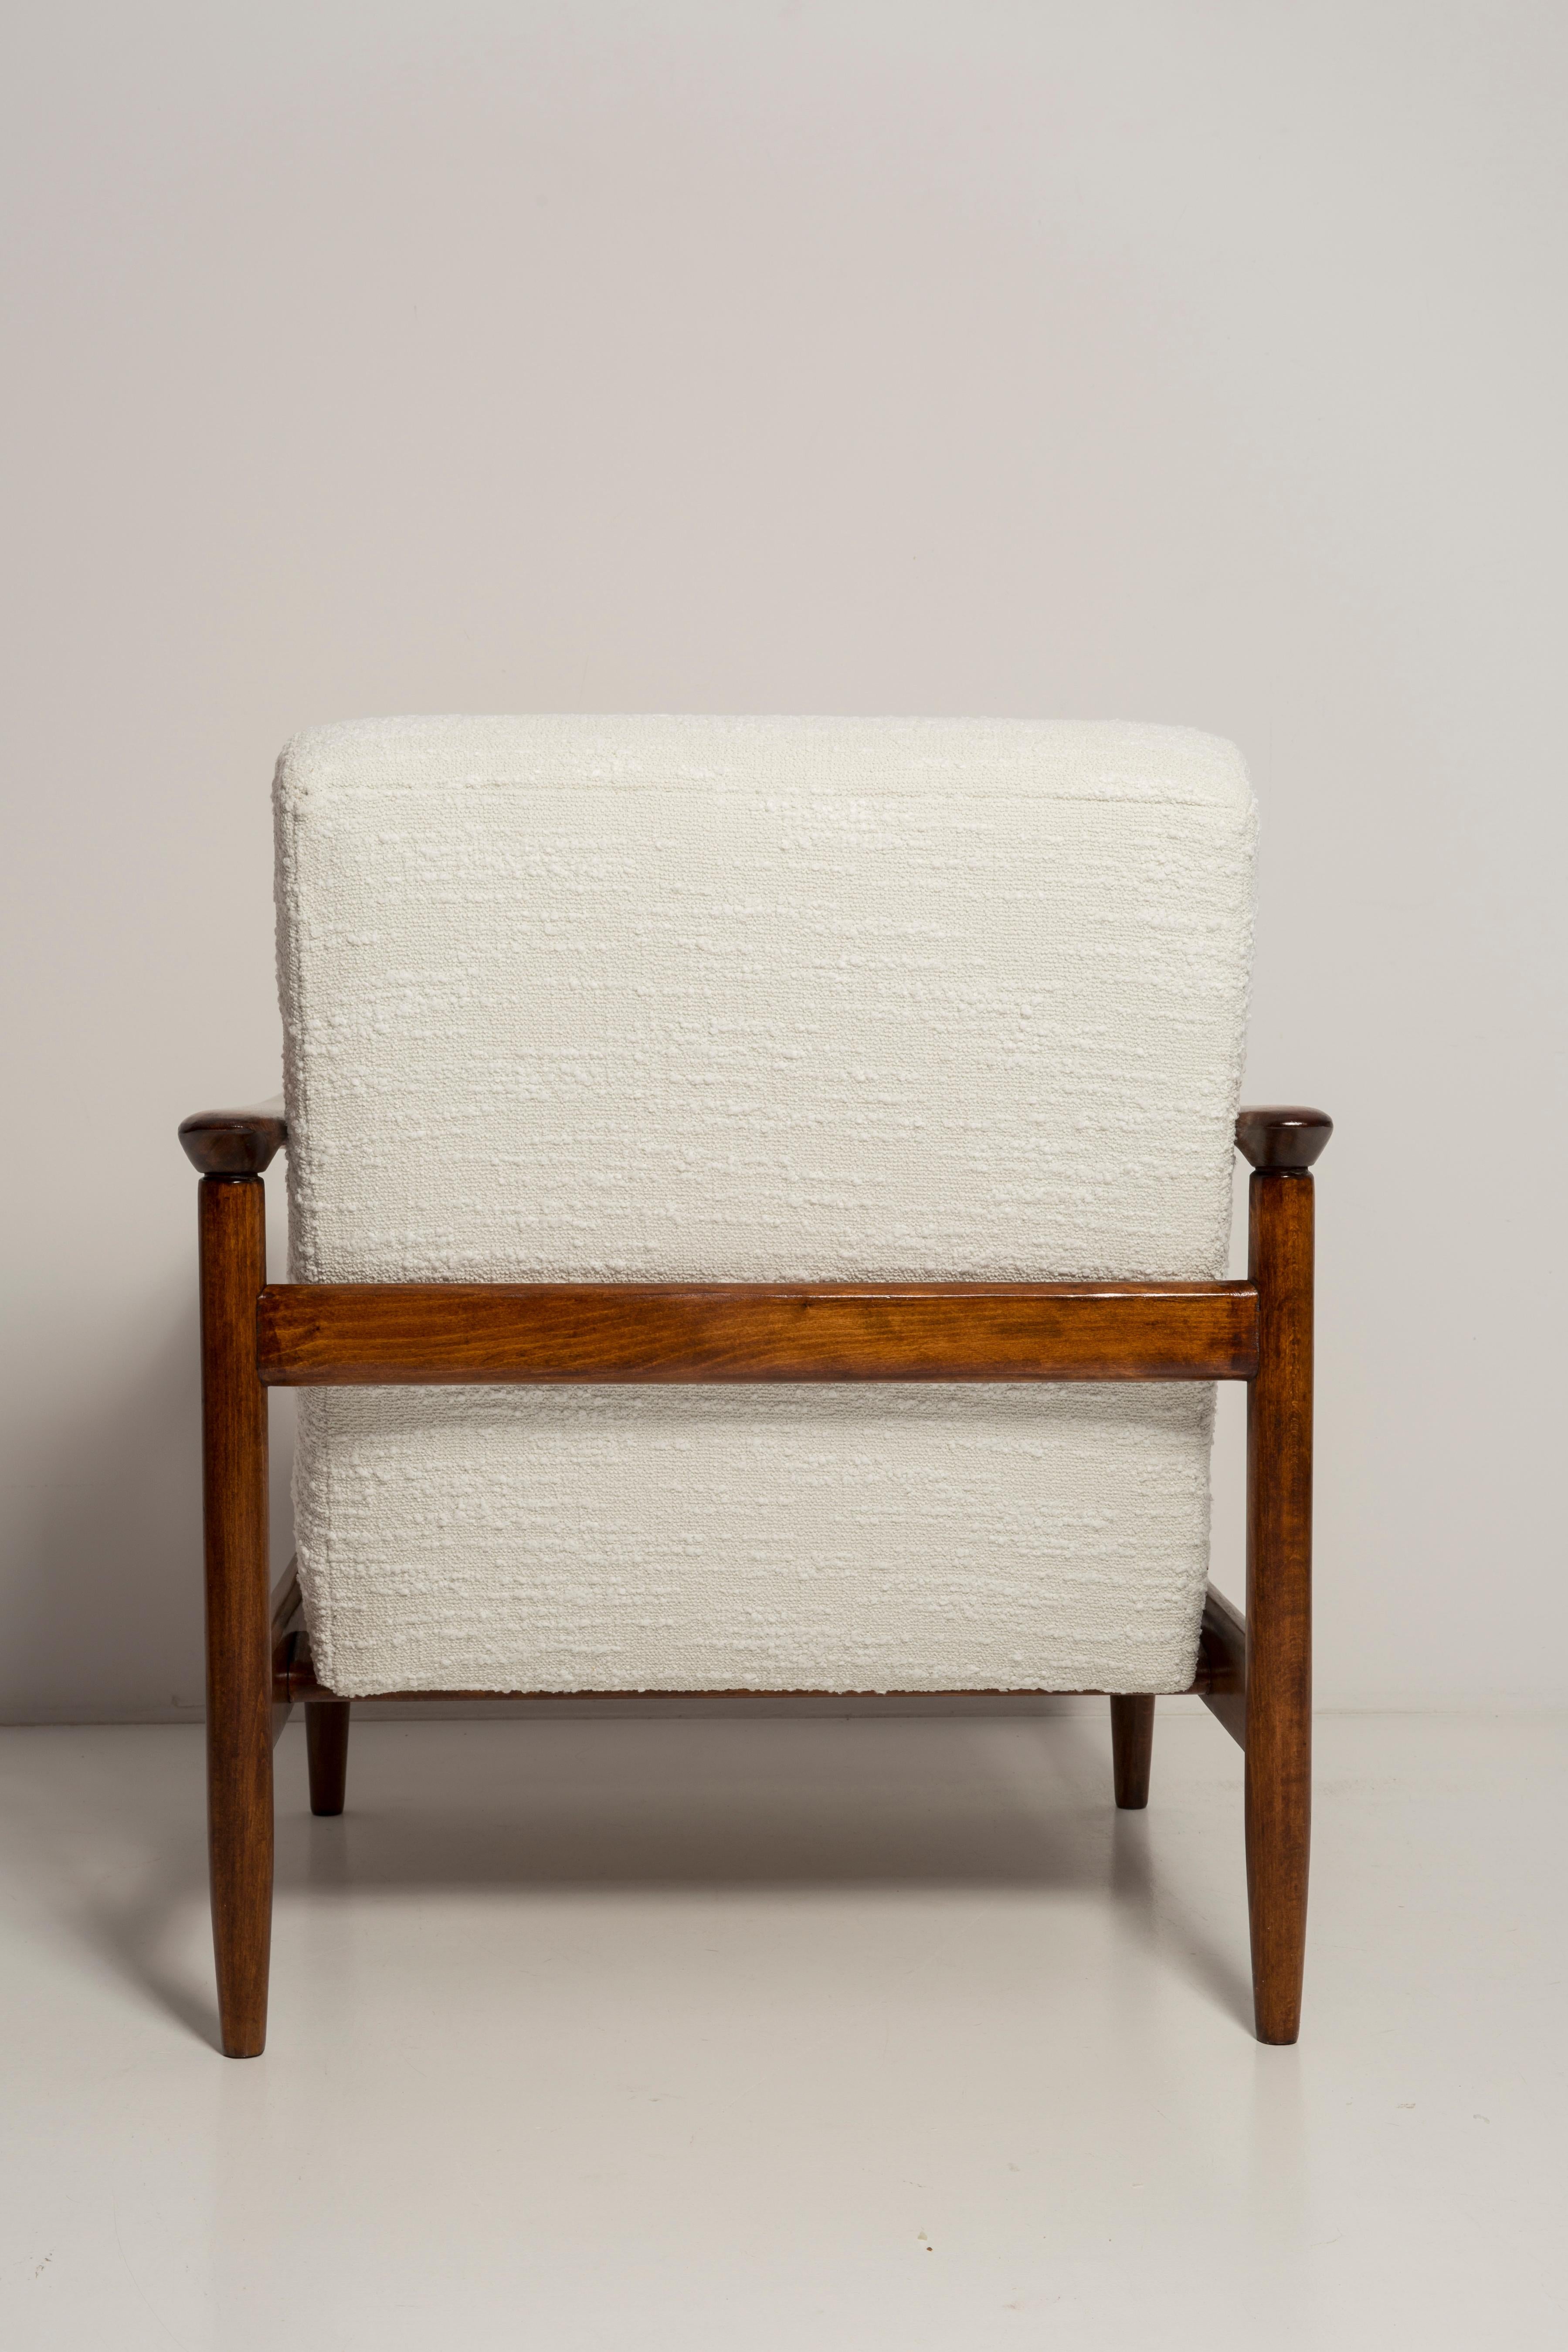 Pair of Mid Century White Boucle Armchairs, GFM 142, Edmund Homa, Europe, 1960s For Sale 4